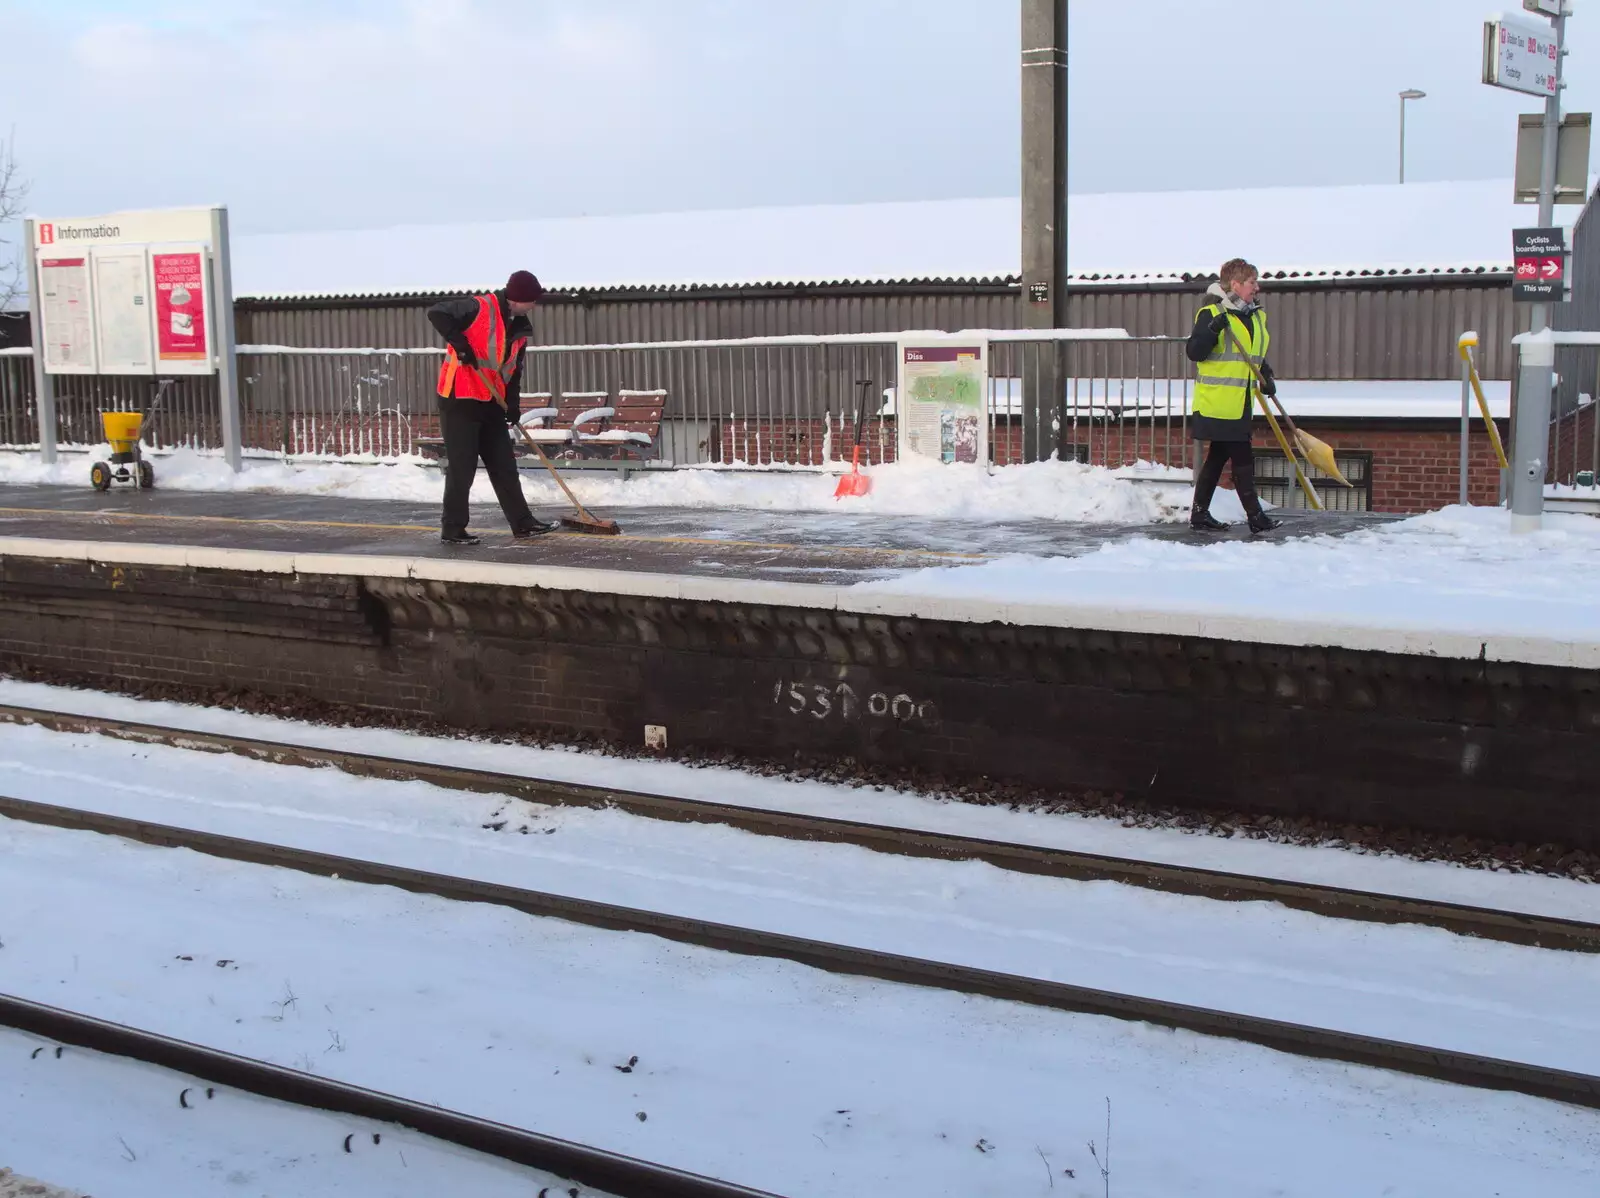 Down at Diss Station, the platform is being cleared, from Snowmageddon: The Beast From the East, Suffolk and London - 27th February 2018